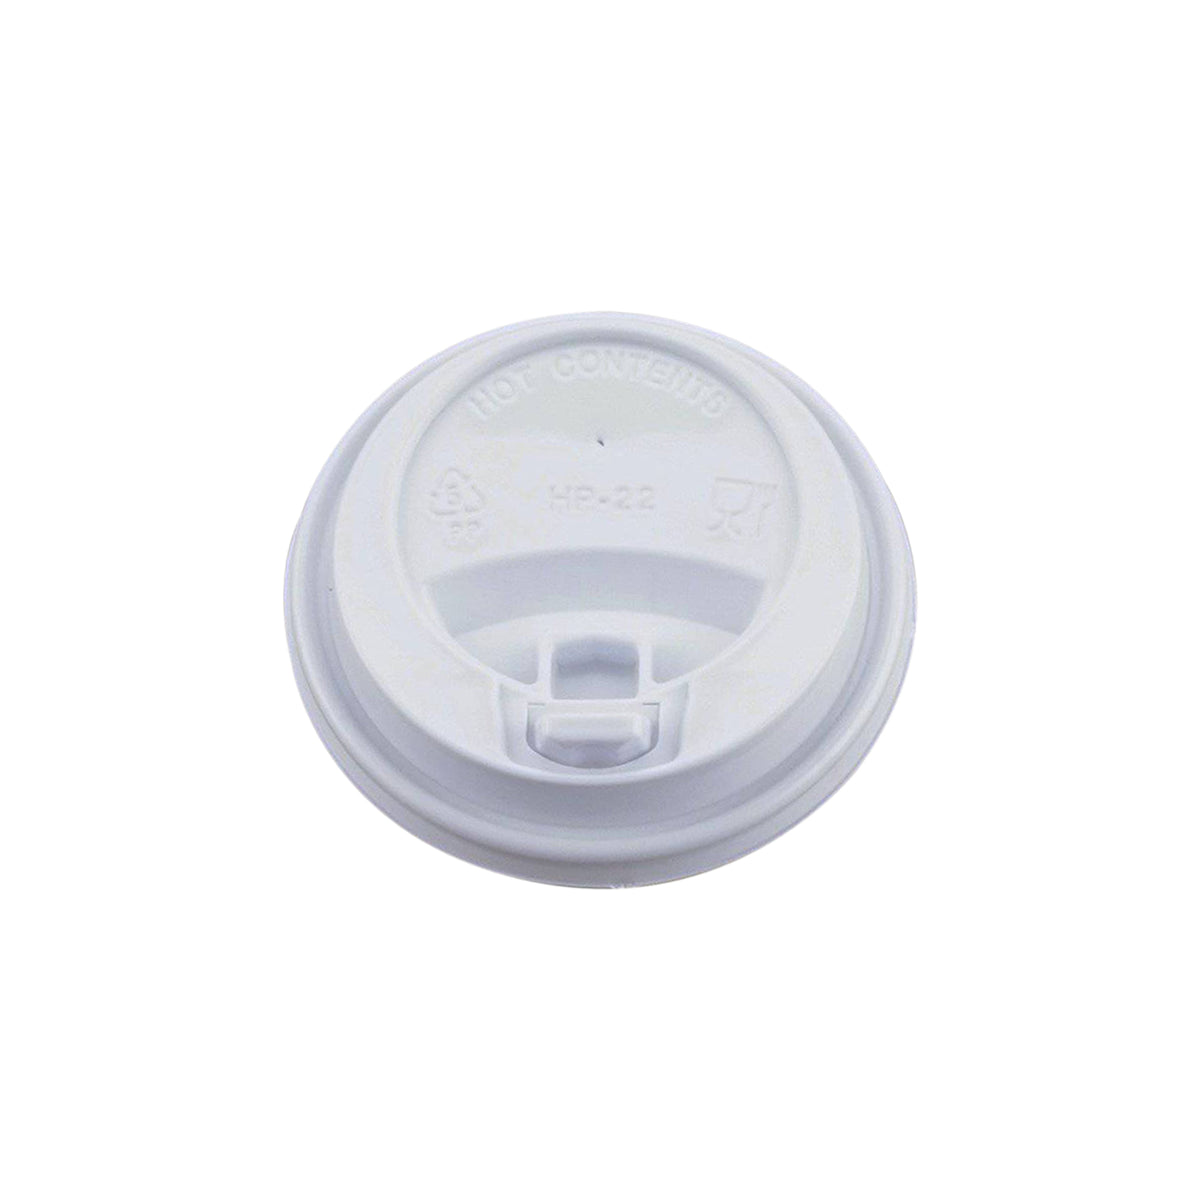 8 Oz White Lids for Paper Cups - Hotpack Global